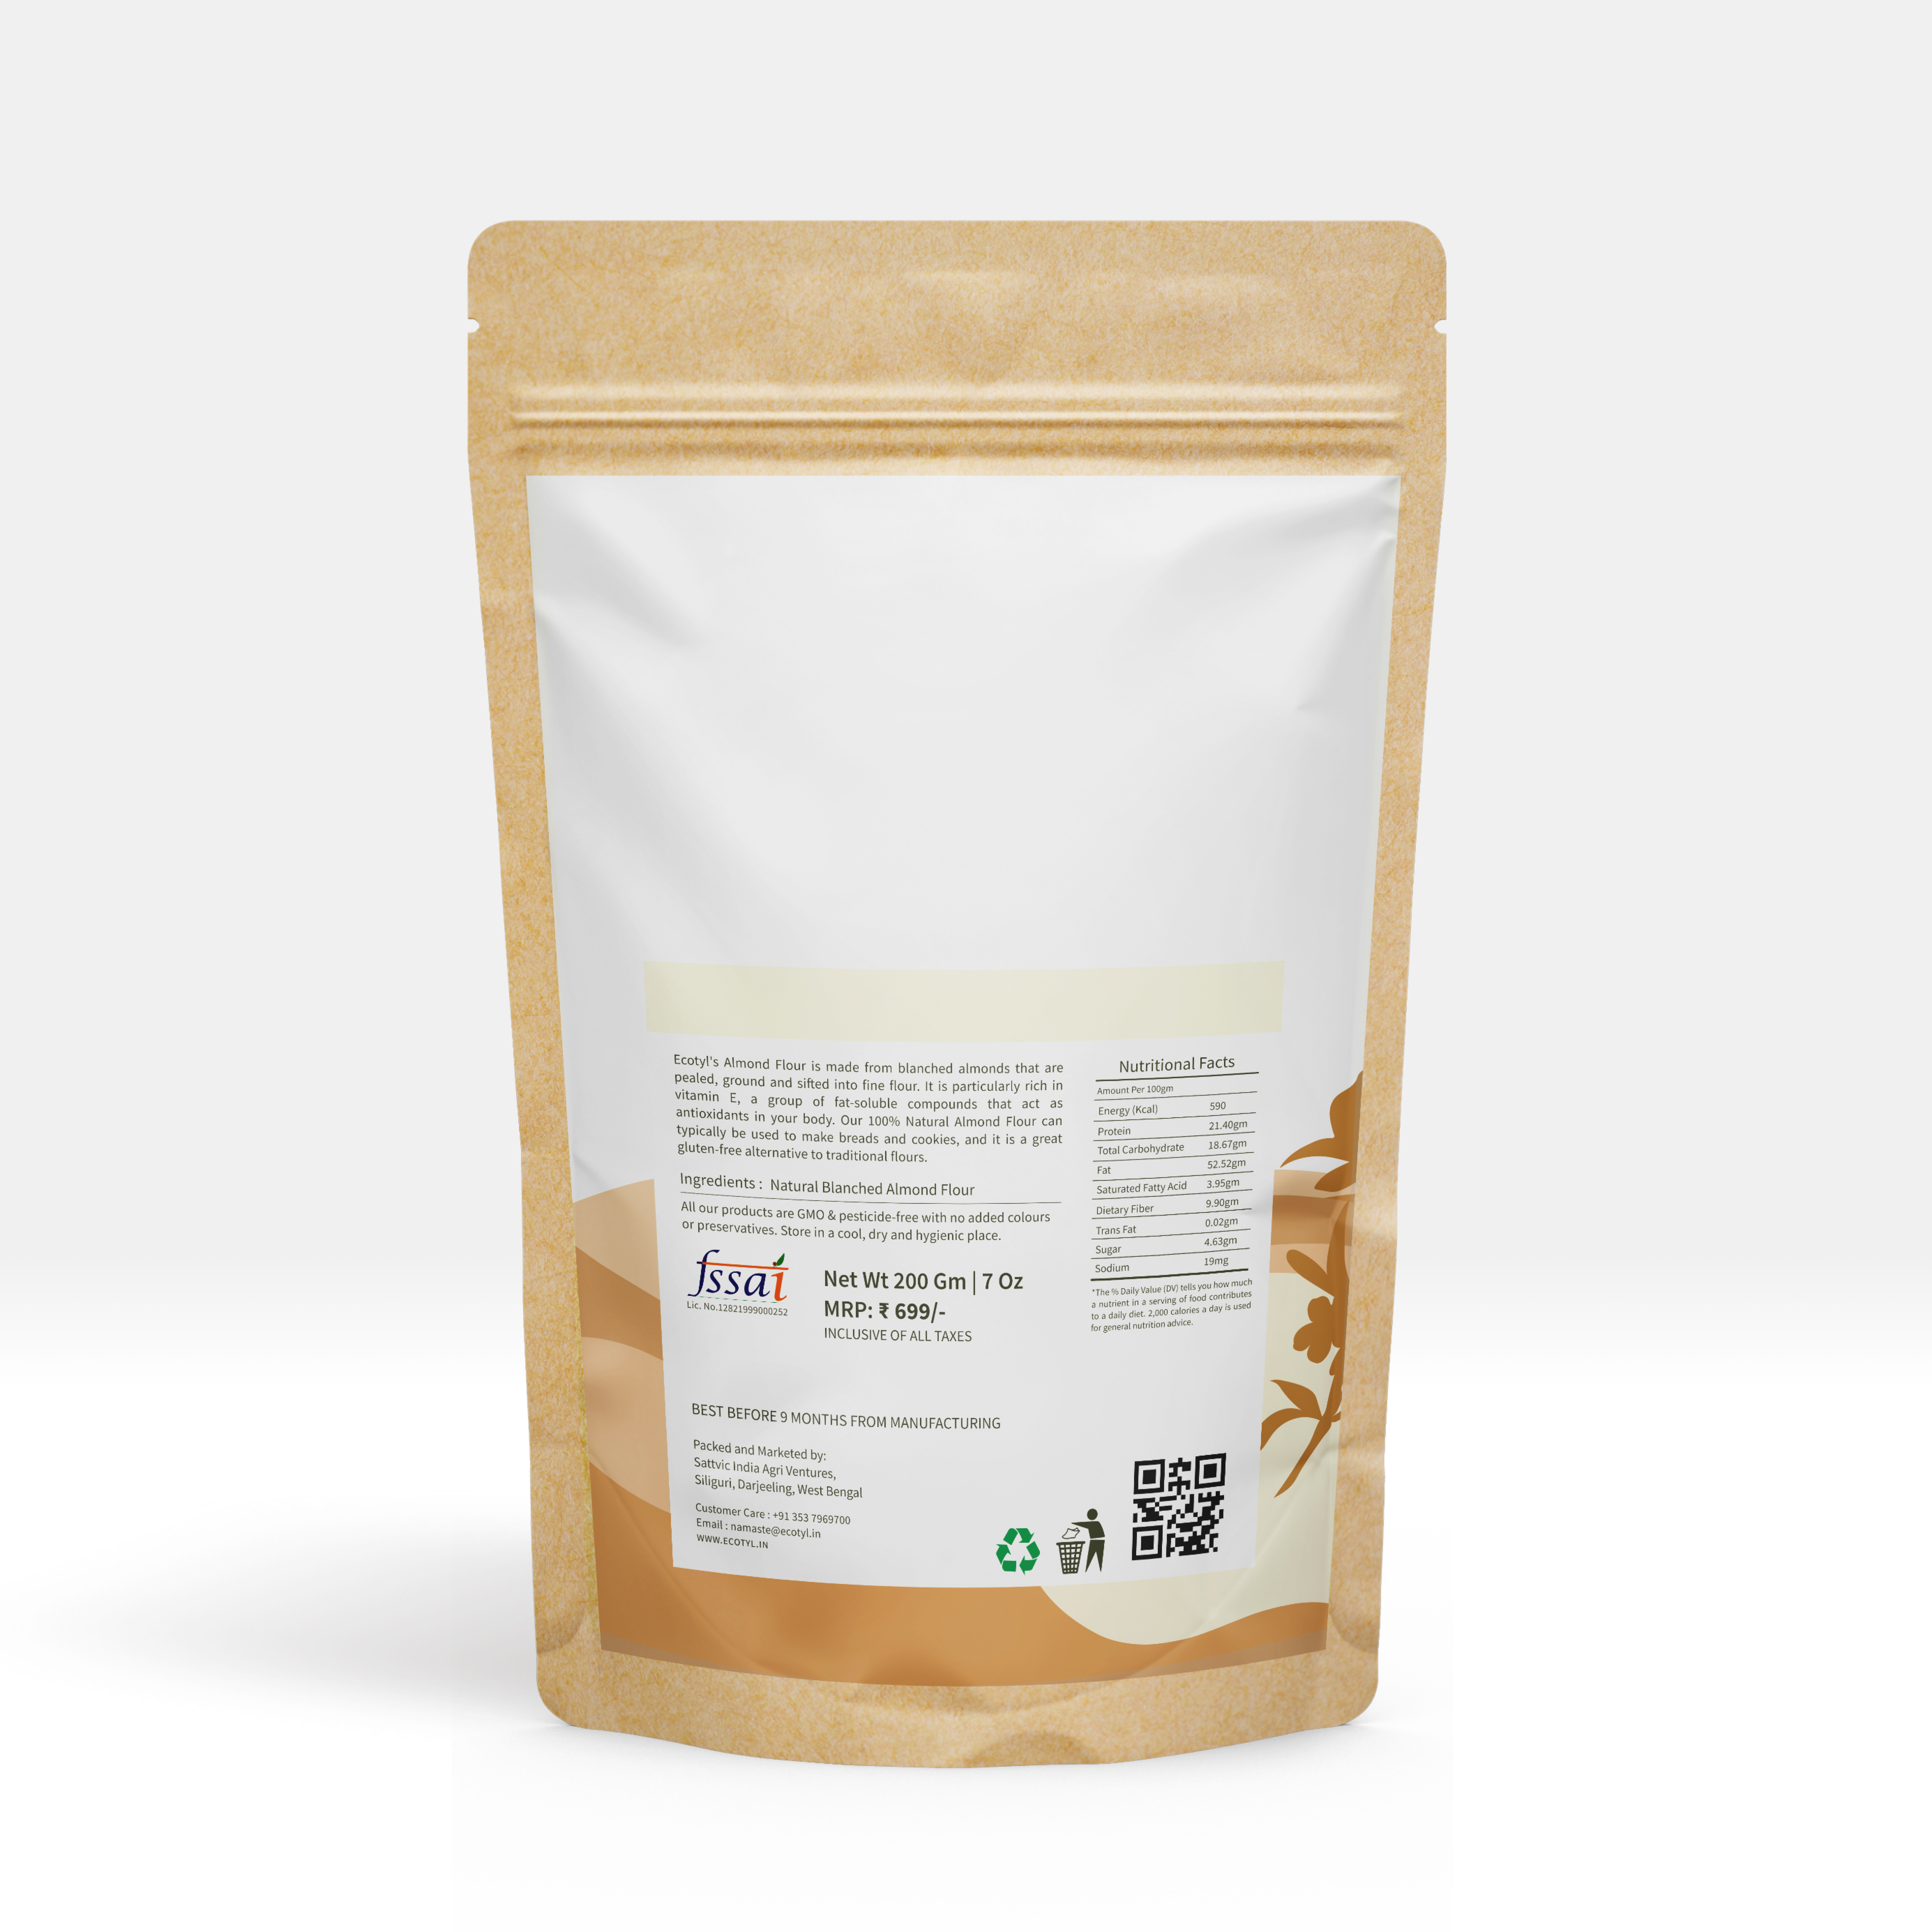 Buy Ecotyl Natural Almond Flour (Blanched) - 200g at Best Price Online